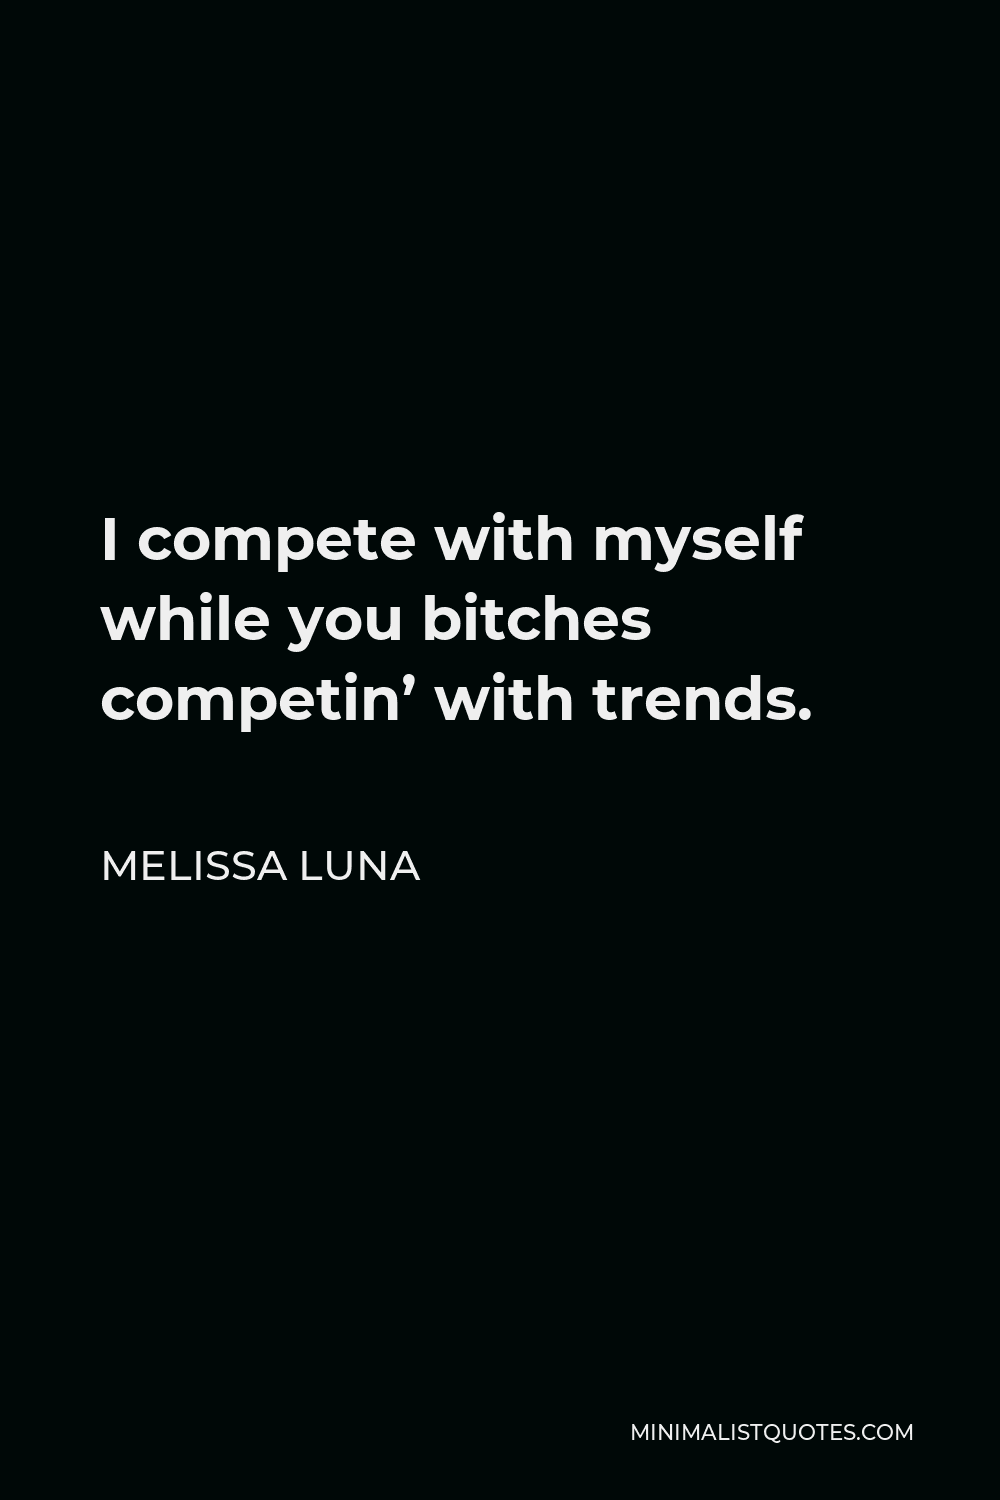 Melissa Luna Quote - I compete with myself while you bitches competin’ with trends.